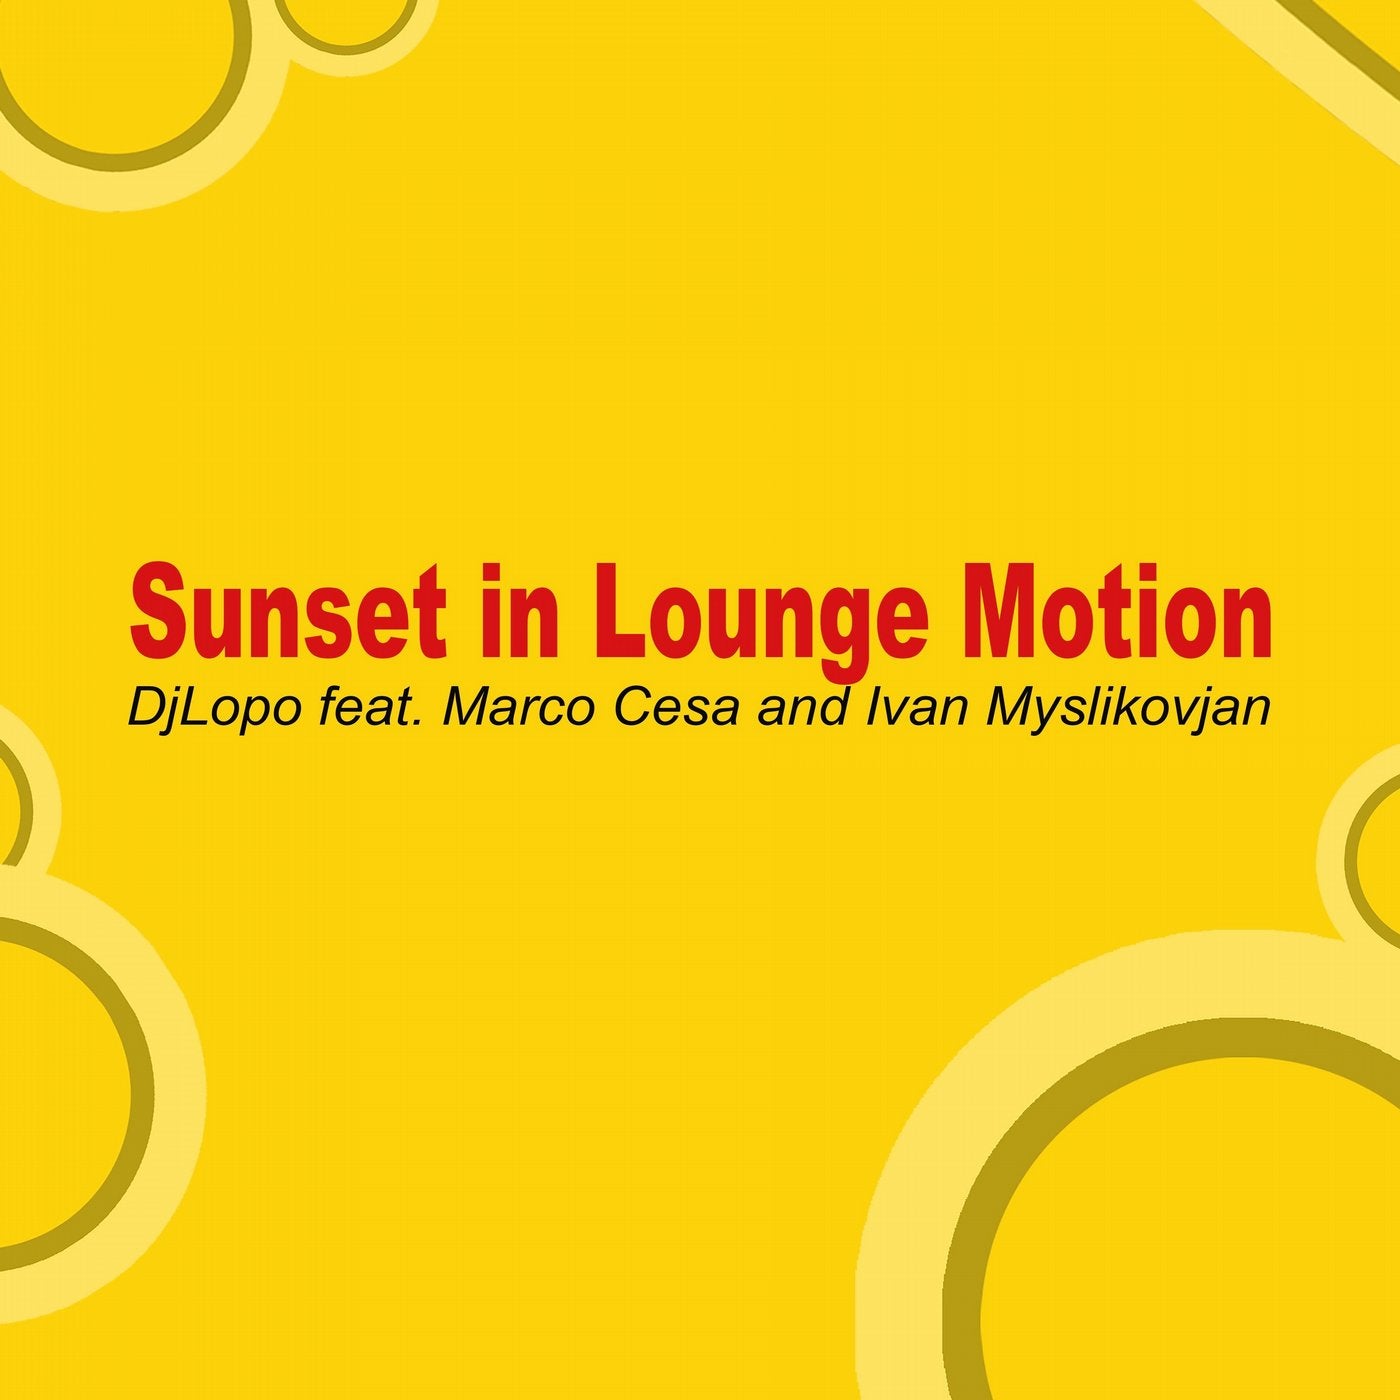 Sunset in Lounge Motion